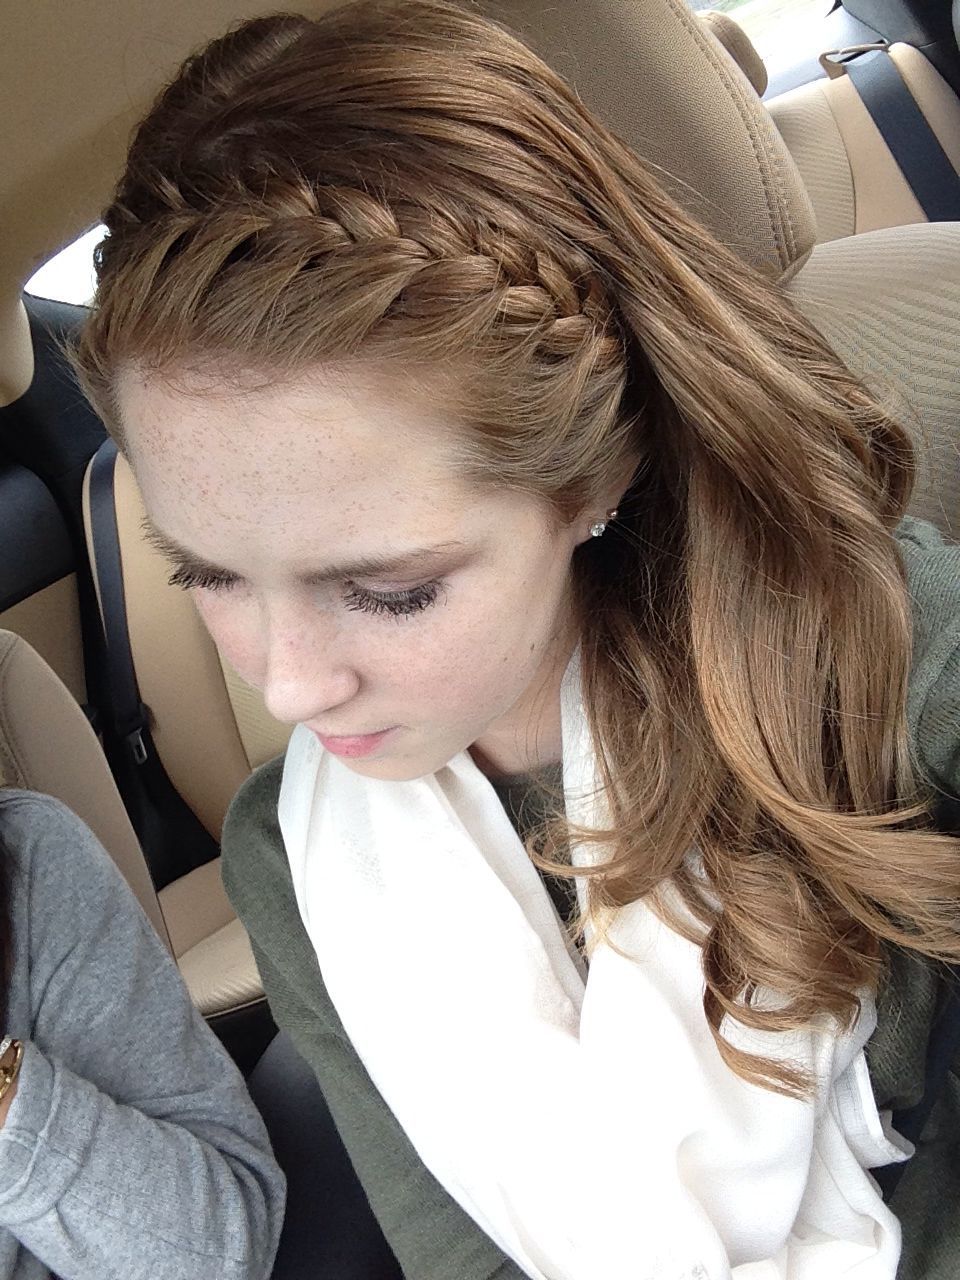 Headband Braid With Loose Curls (View 1 of 20)